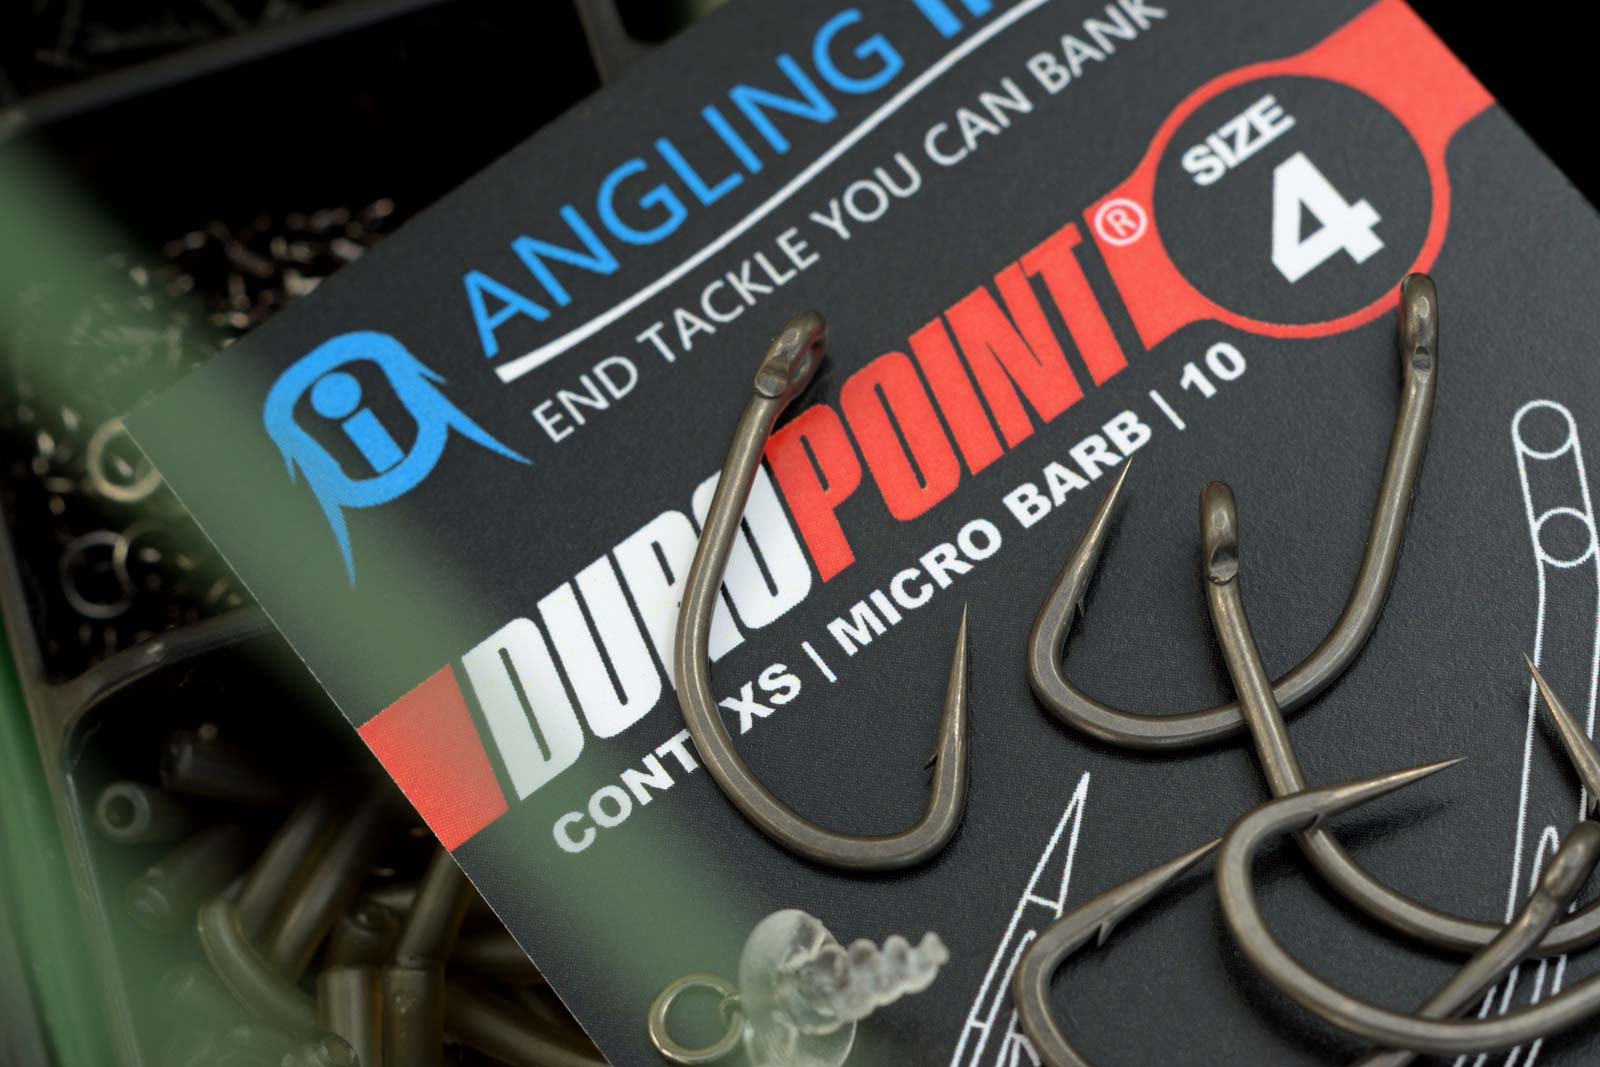 Angling Iron - Carp - End tackle you can bank on.